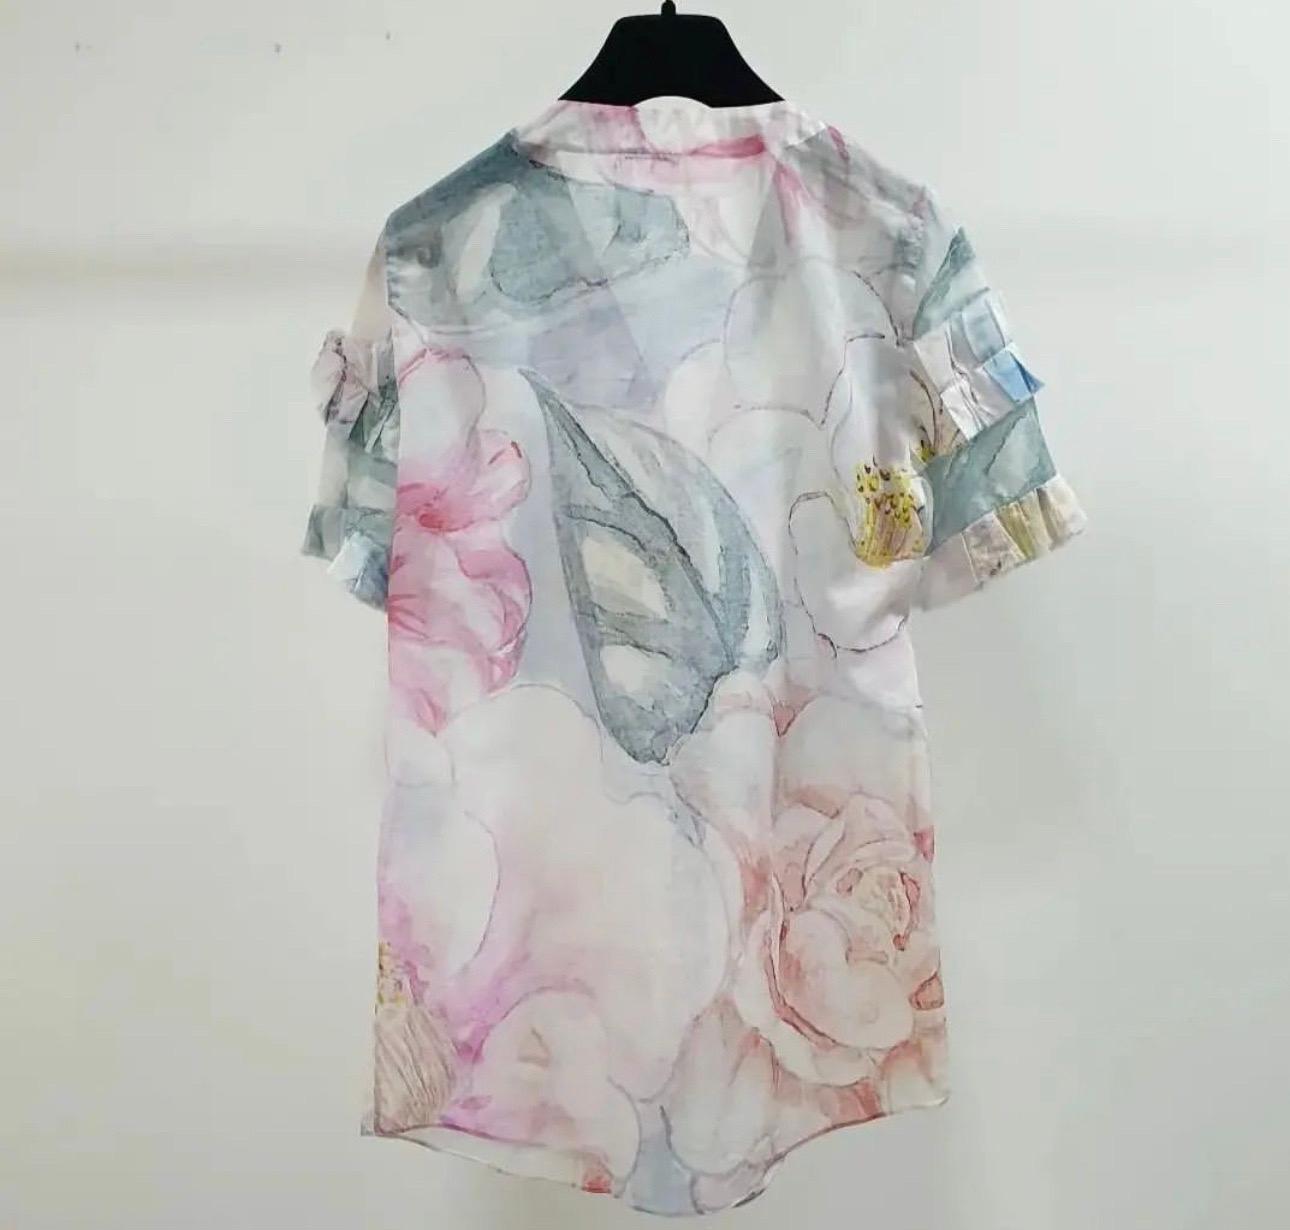 Perfect for spring summer and easy to dress up and down through the day, this Chanel  blouse is a must have feminine fashion piece.
Designed in multicoloured floral watercolour print cotton fabric, this blouse features a collar and concealed button